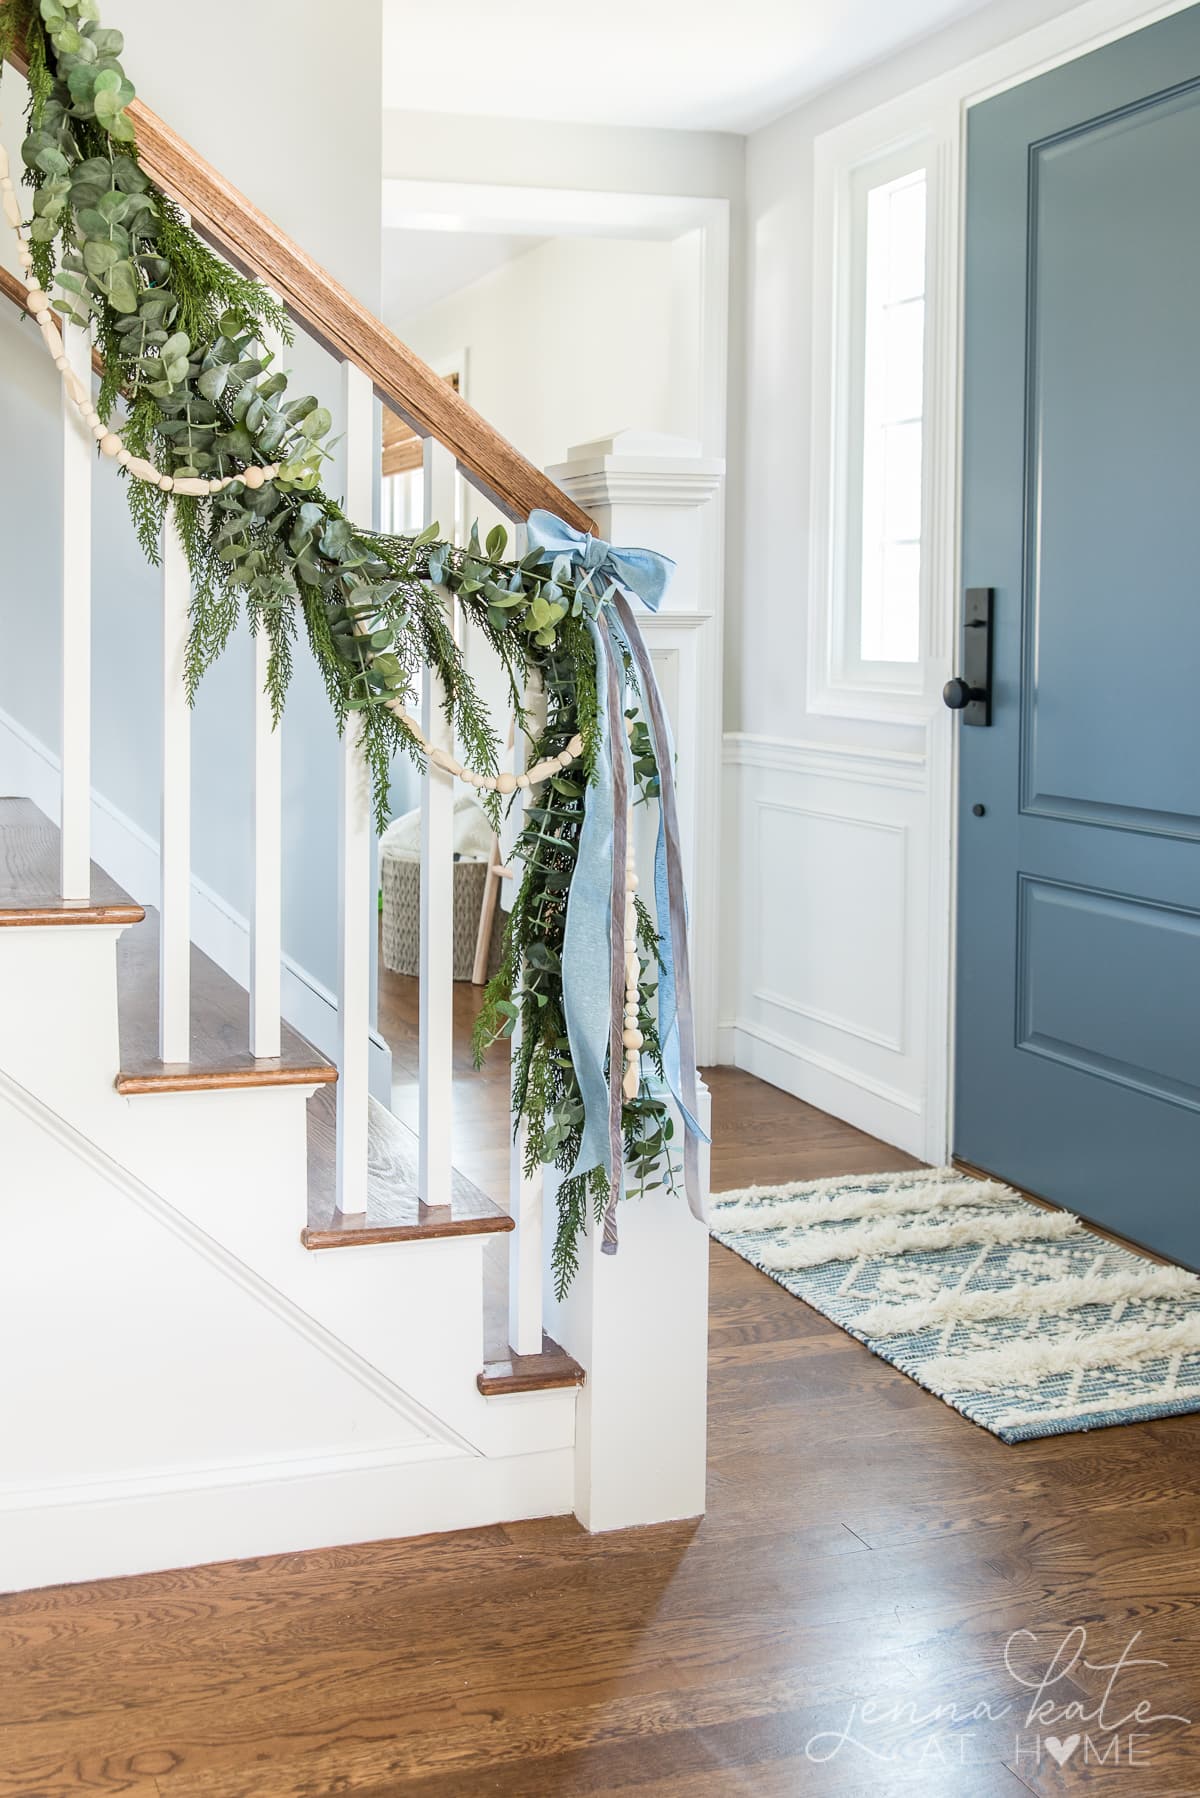 Hallway with garland on the banister